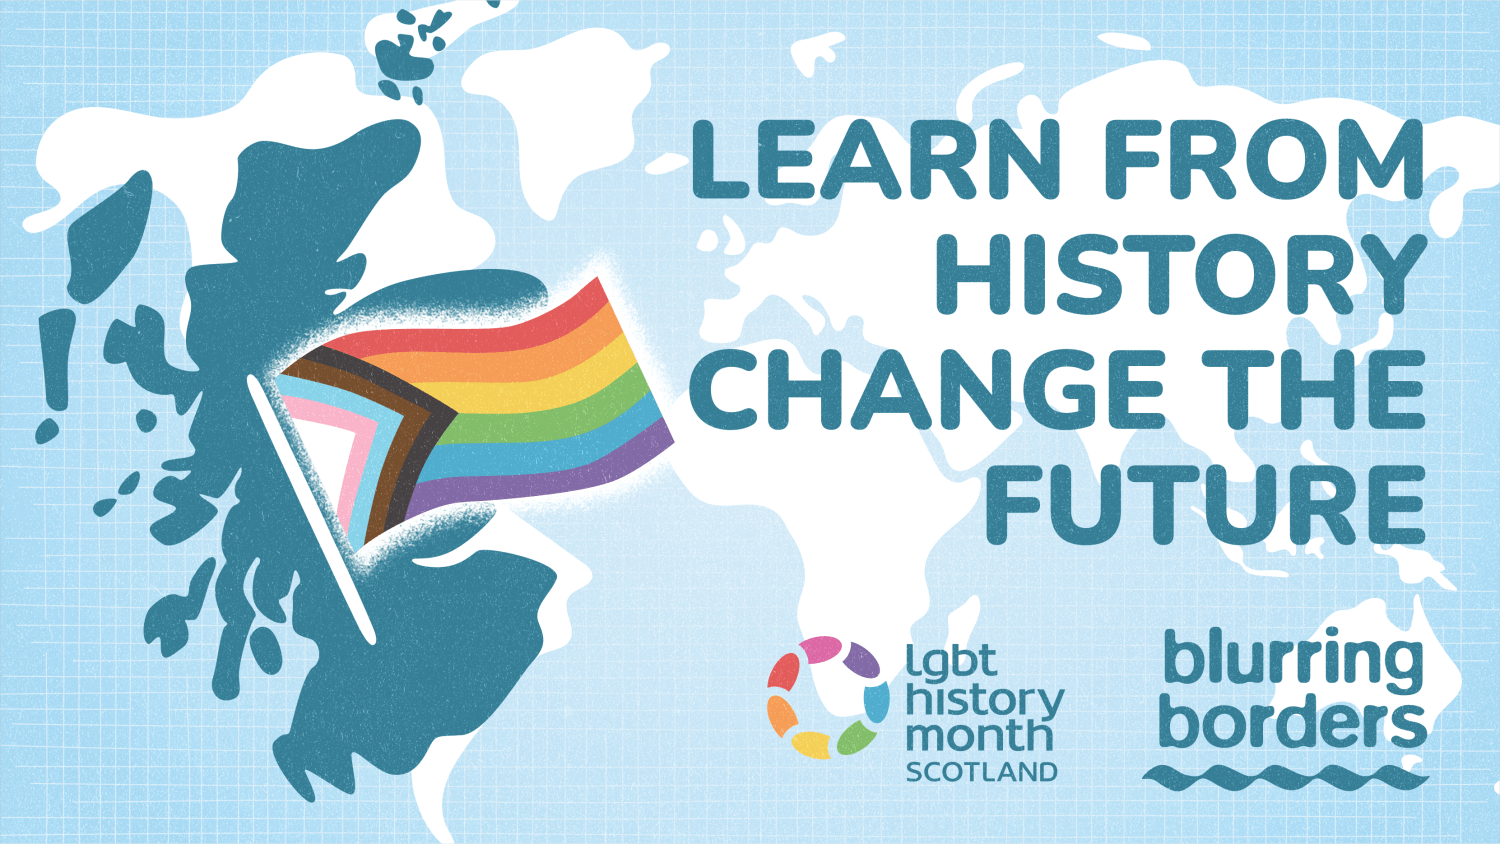 Promotional image for LGBT Youth Scotland History Month Theme - Blurred Borders